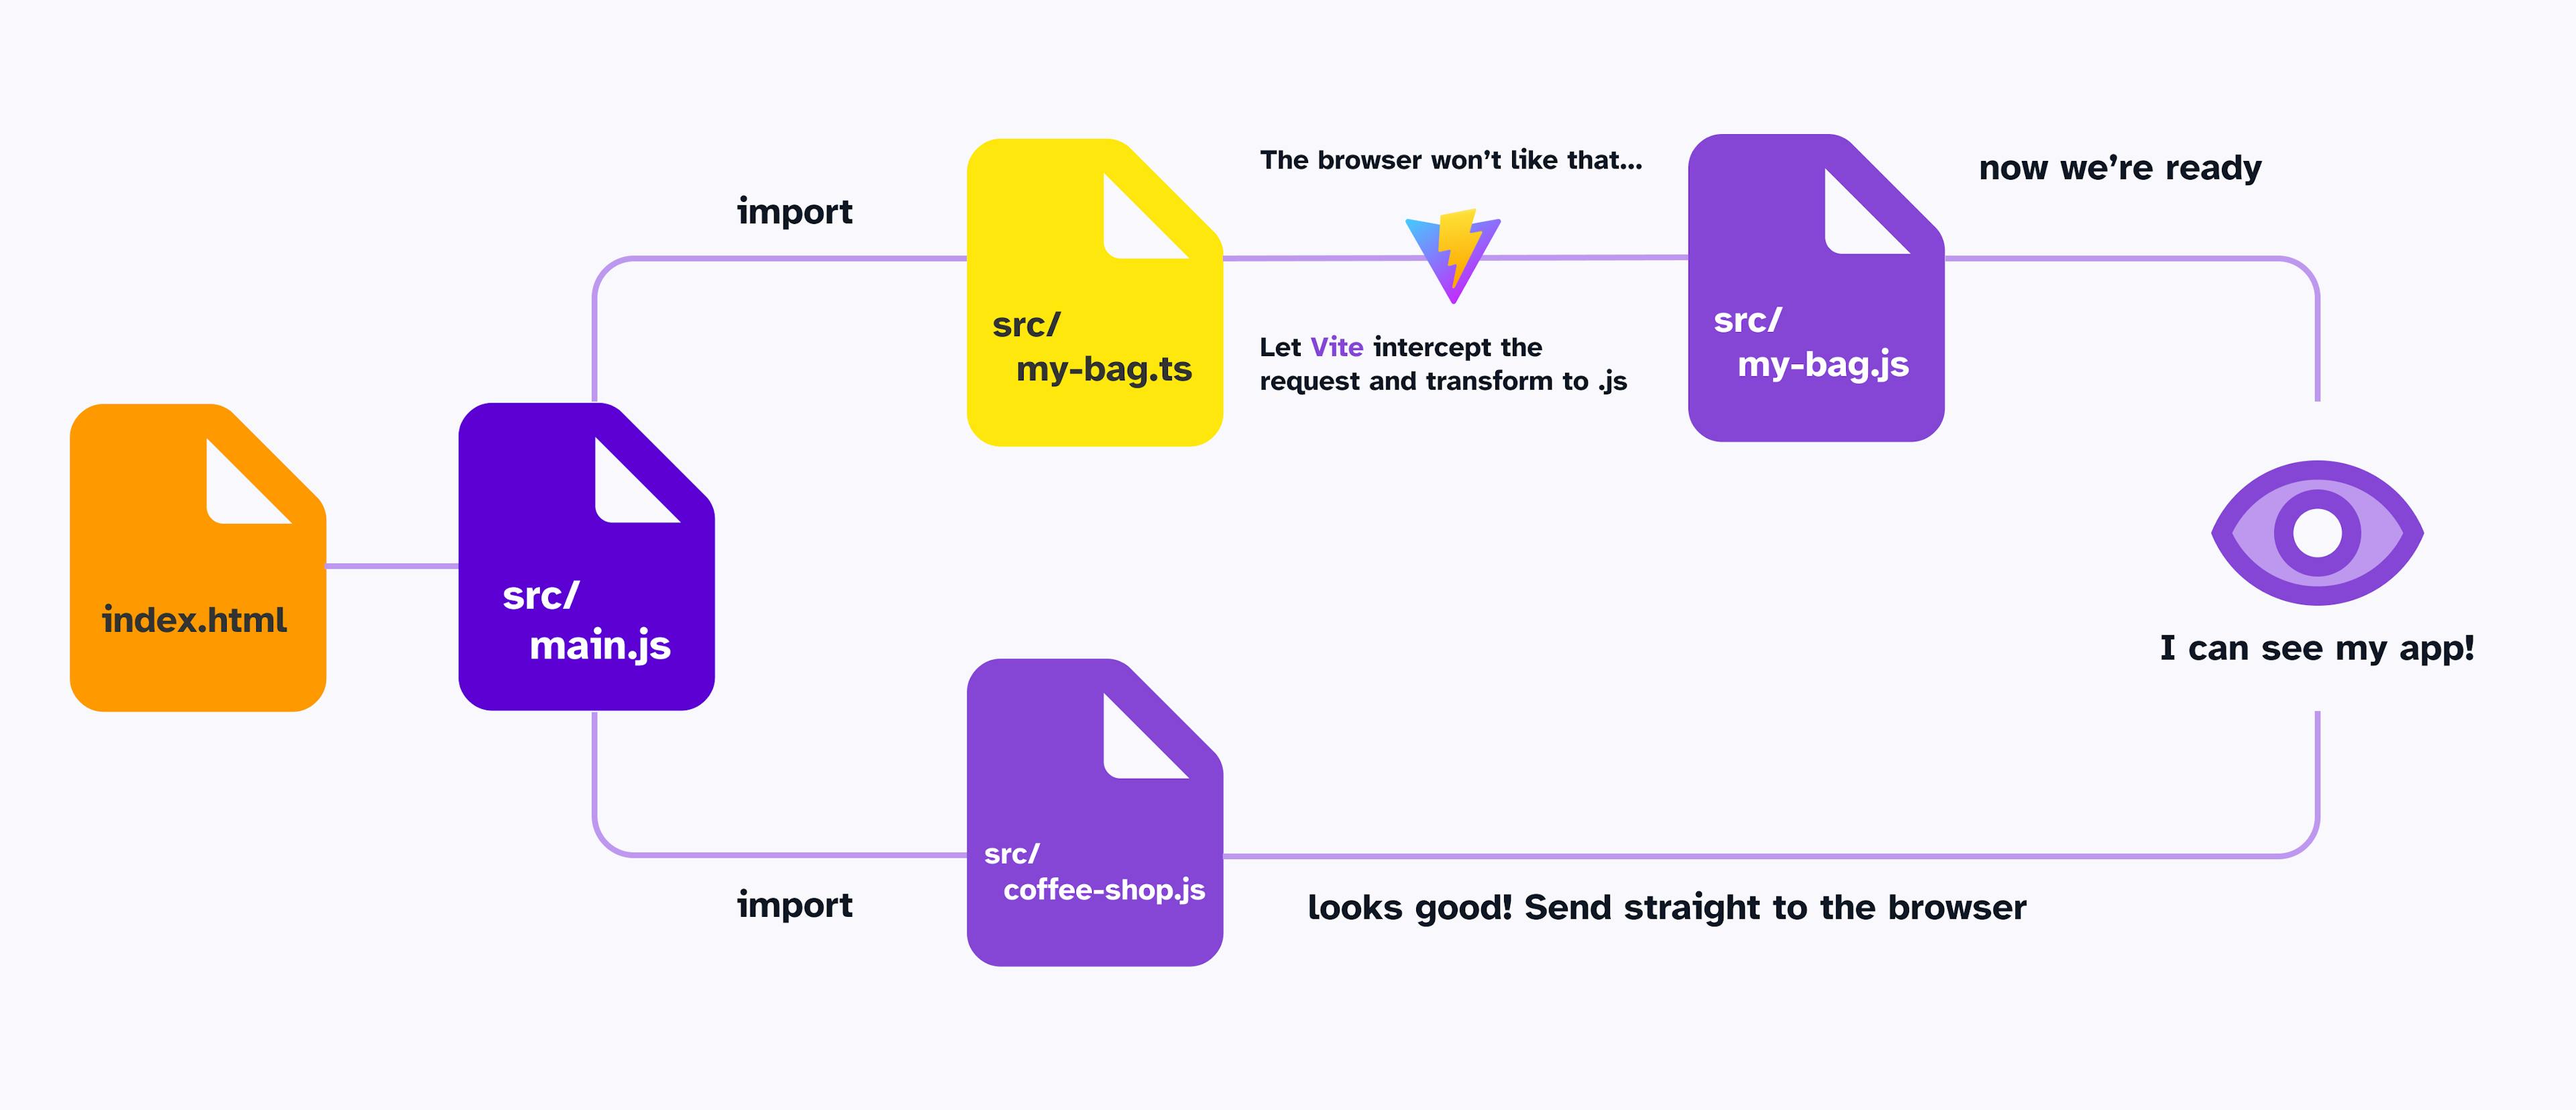 An explainer diagram that shows src/main.js importing a regular JavaScript file without any issues. On the other side, src/main.js tries to import a TypeScript file, which the browser doesn't like, so Vite intercepts the request and turns it into a JavaScript file that the browser will accept.